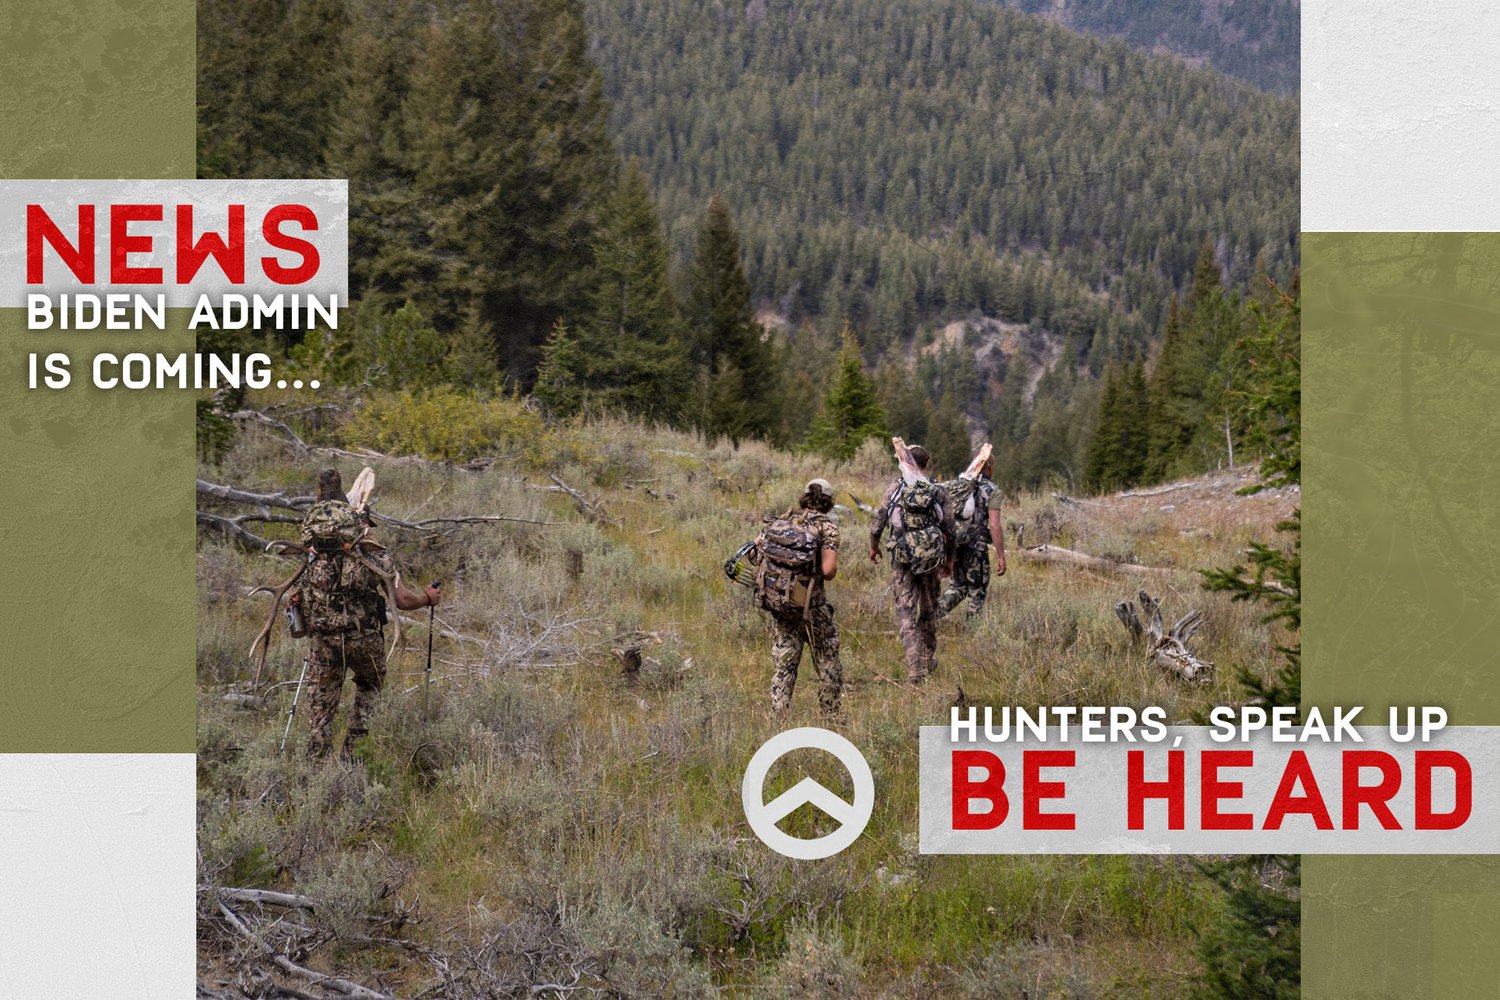 PUBLIC LAND HUNTING OPPORTUNITIES AT RISK!